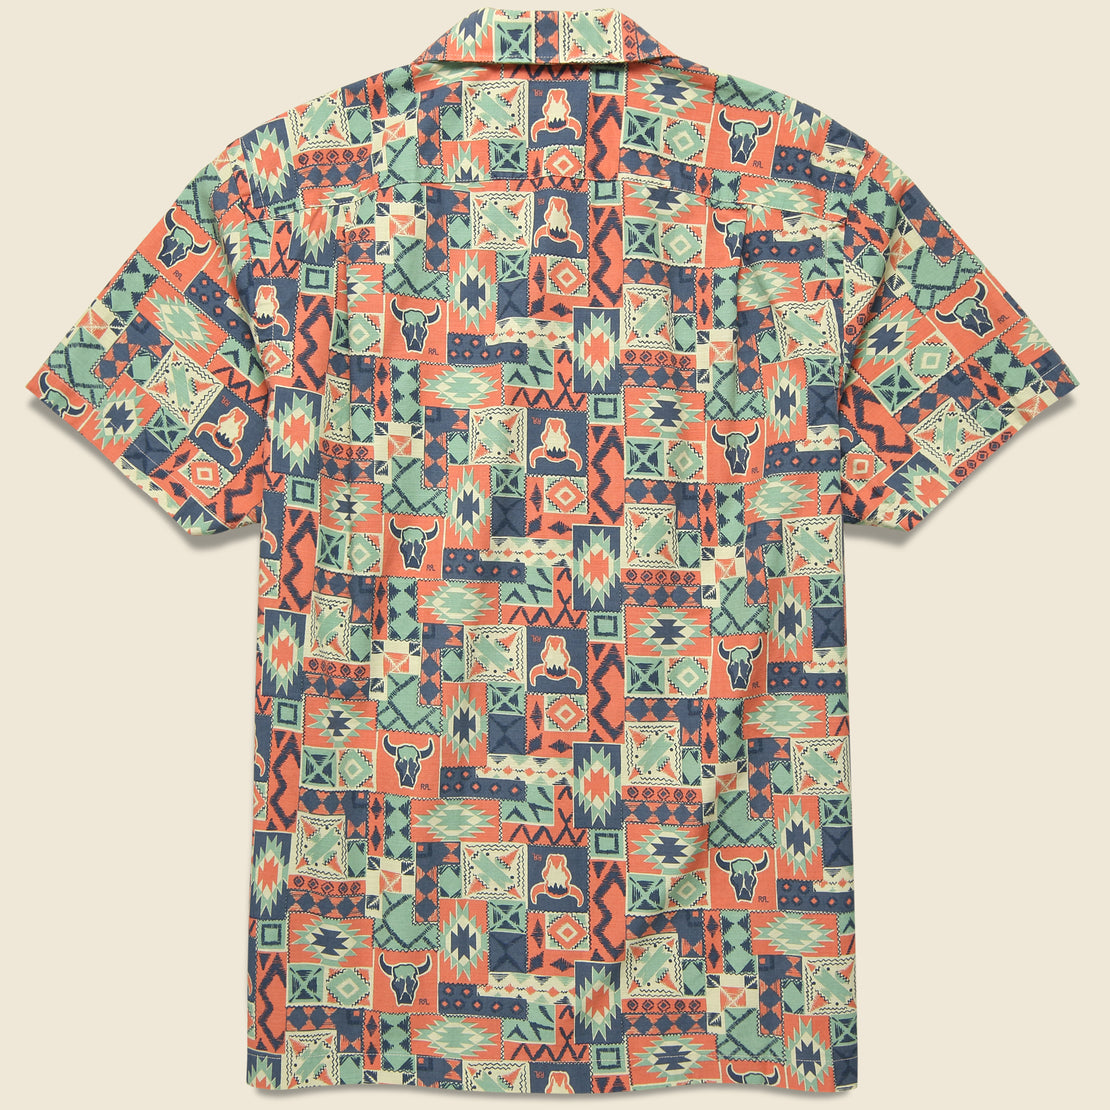 Western Print Camp Shirt - Teal/Multi - RRL - STAG Provisions - Tops - S/S Woven - Other Pattern